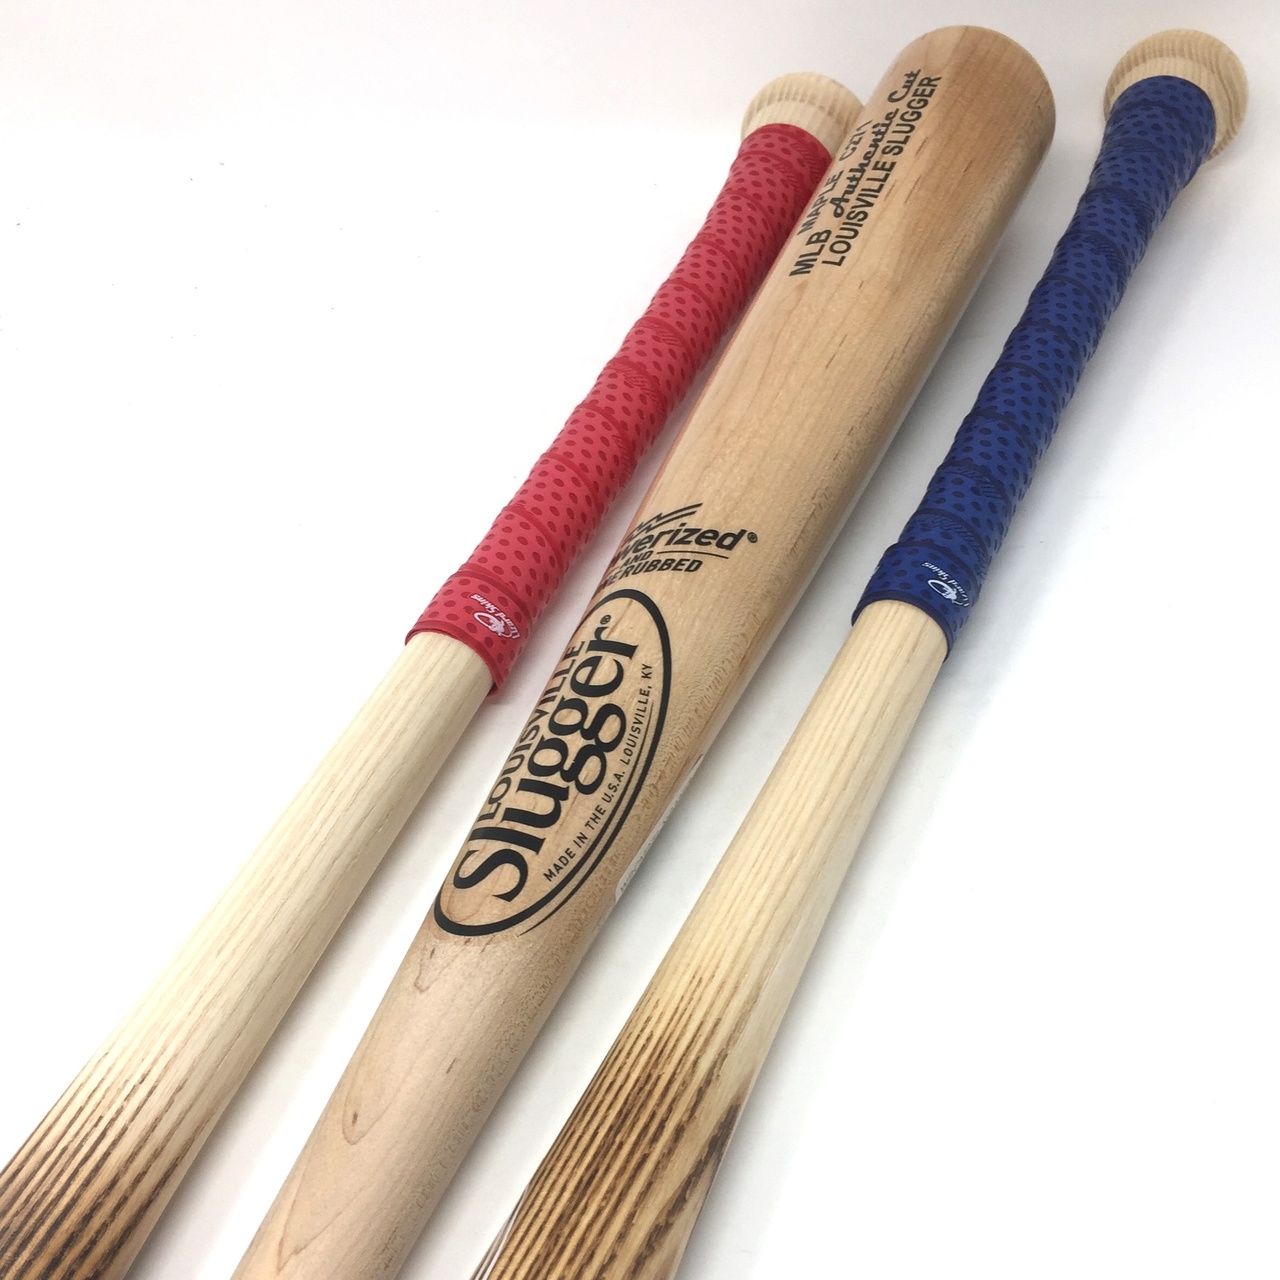 33 inch wood baseball bats by Louisville Slugger. MLB Authentic Cut Ash Wood. 33 inch. Cupped. 3 bats in this bat pack. Lizard Skin Grips.